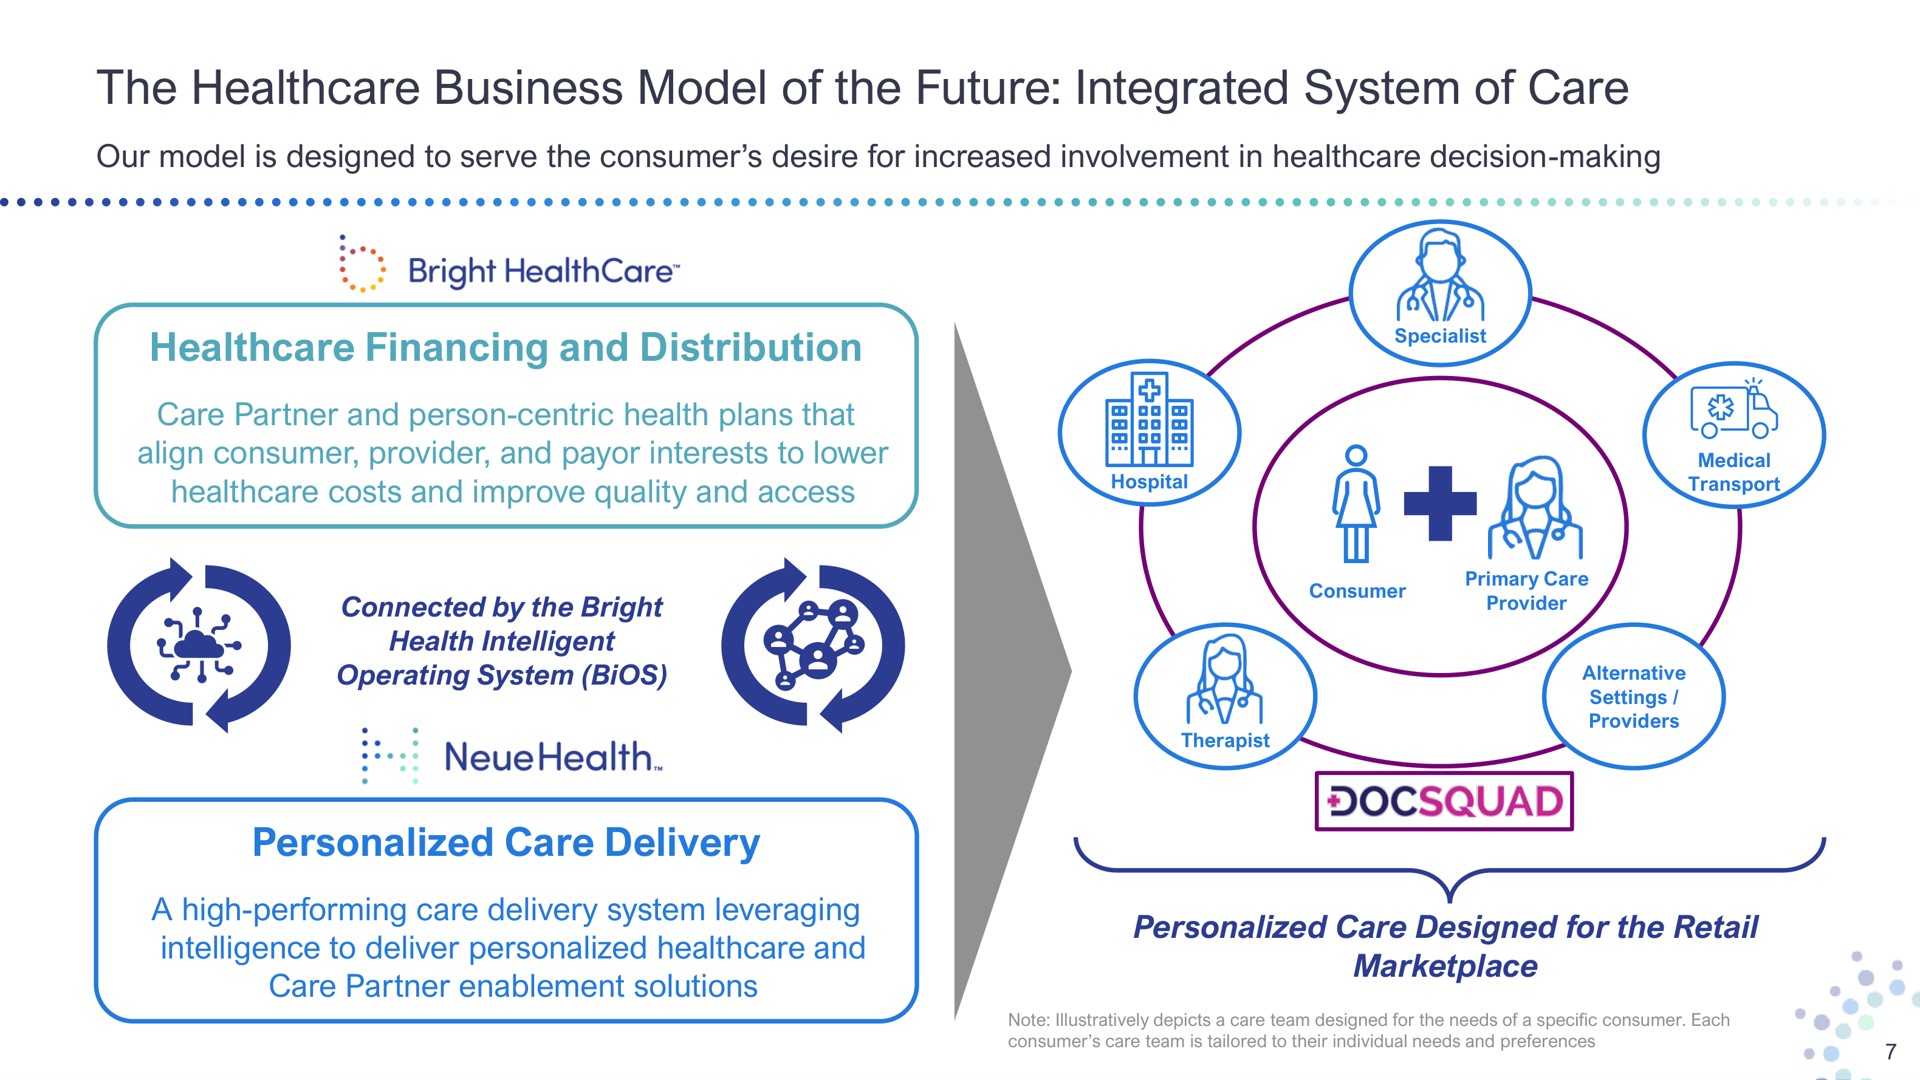 the business model of the future integrated system of care financing and distribution personalized care delivery our is designed to serve consumer desire for increased involvement in decision making bright partner person centric health plans that align consumer provider payor interests to lower costs improve quality access fas tas connected by bright health intelligent operating bios partner enablement solutions a high performing leveraging intelligence to deliver designed for retail | Bright Health Group